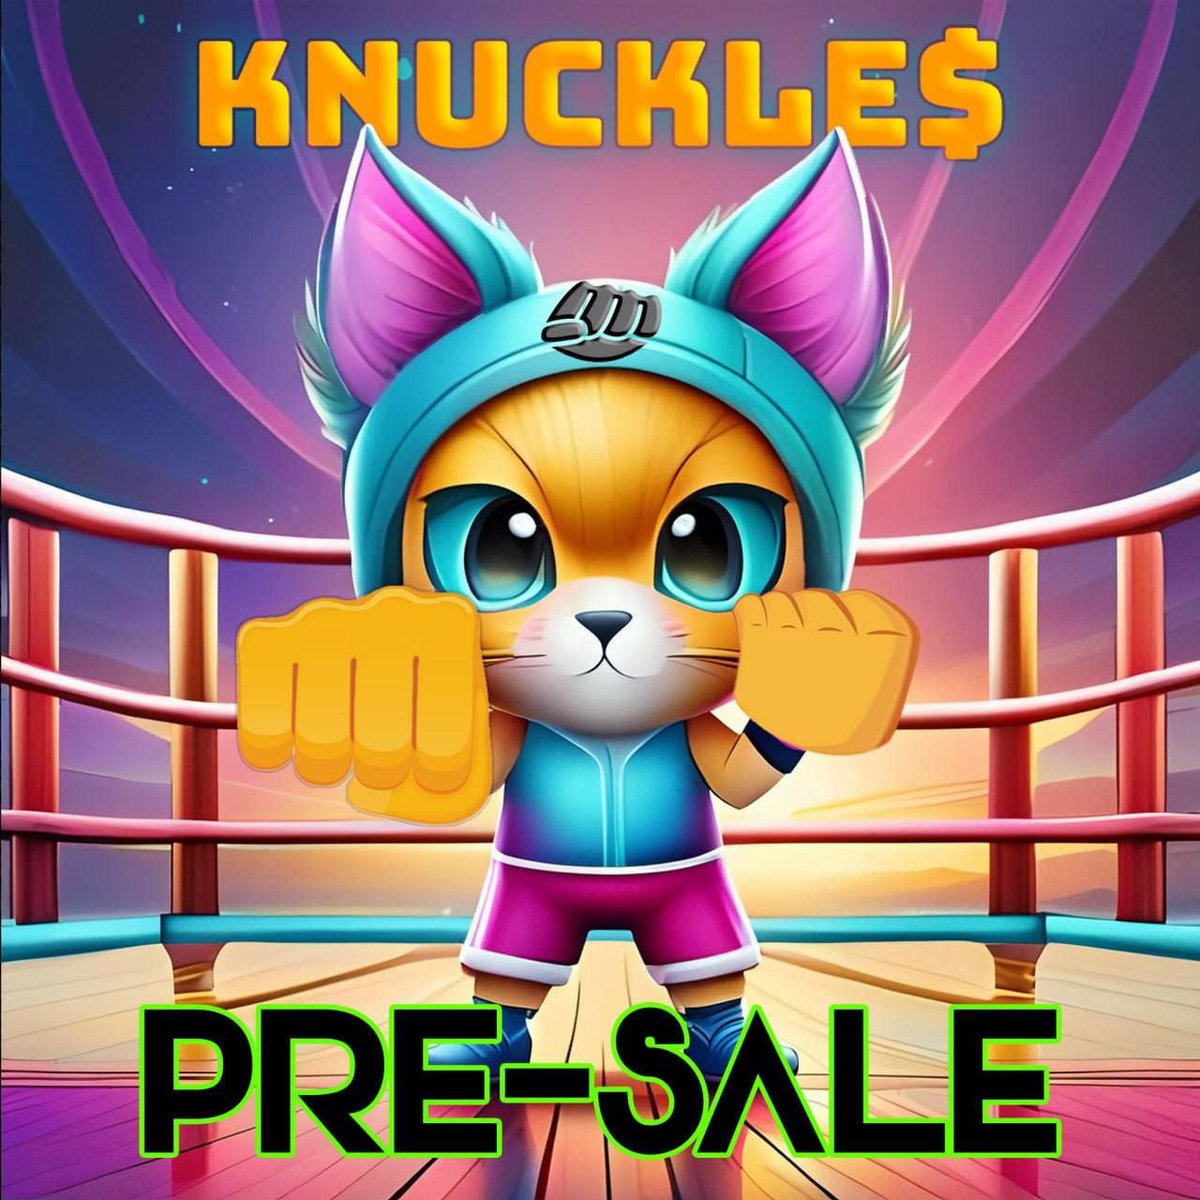 PRESALE

KNUCKLES MEME

WEBSITE

knucklesmeme.io

TELEGRAM

t.me/KNUCKLES_MEME

X Twitter @knucklesmeme1

STARTS MAY/30/24 -9am EST

SOFT CAP: 3000 sol

HARD CAP: 5000 sol

Max Sole Purchase: 10 sol

Liquidity: 35%

Total Supply: 1 Billlion

Circulating Supply: 650